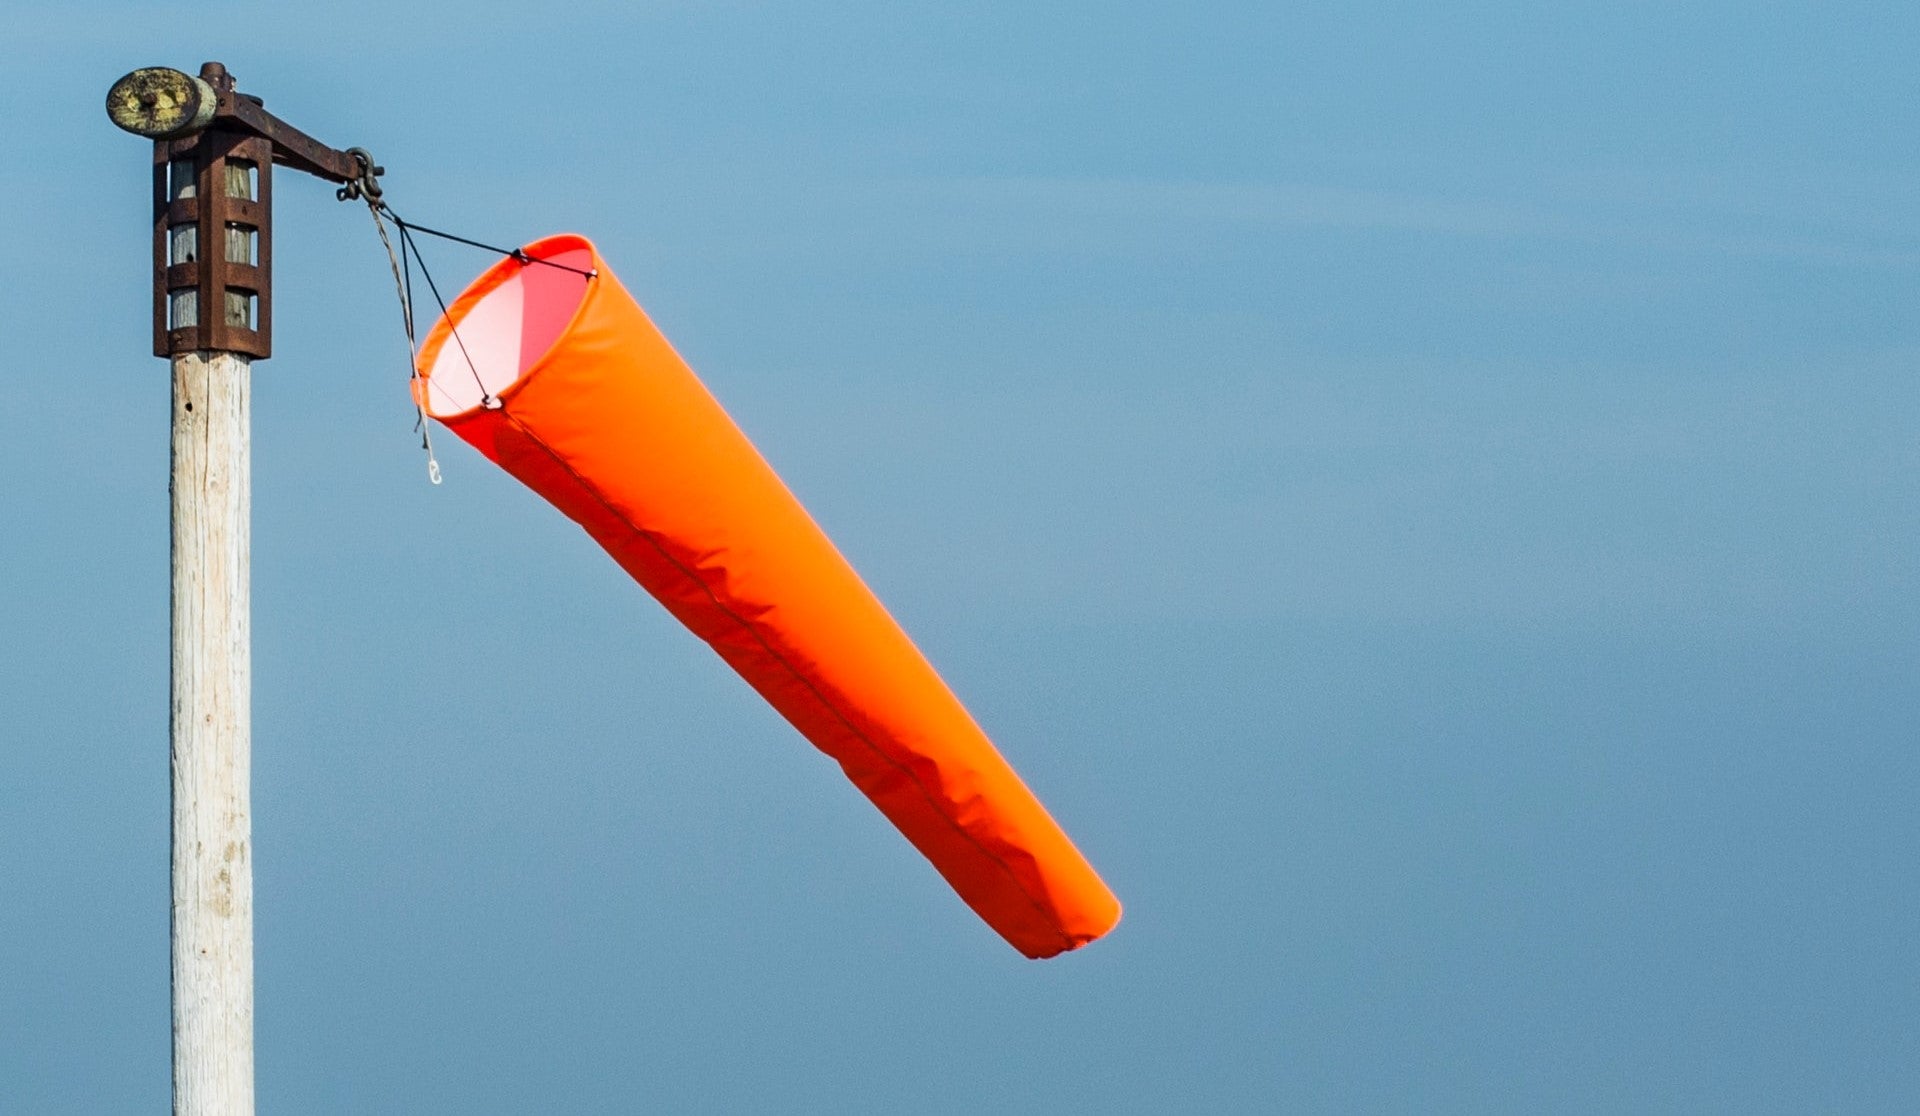 What is a Windsock? Answers to this and other basic questions by the Custom Windsock Company